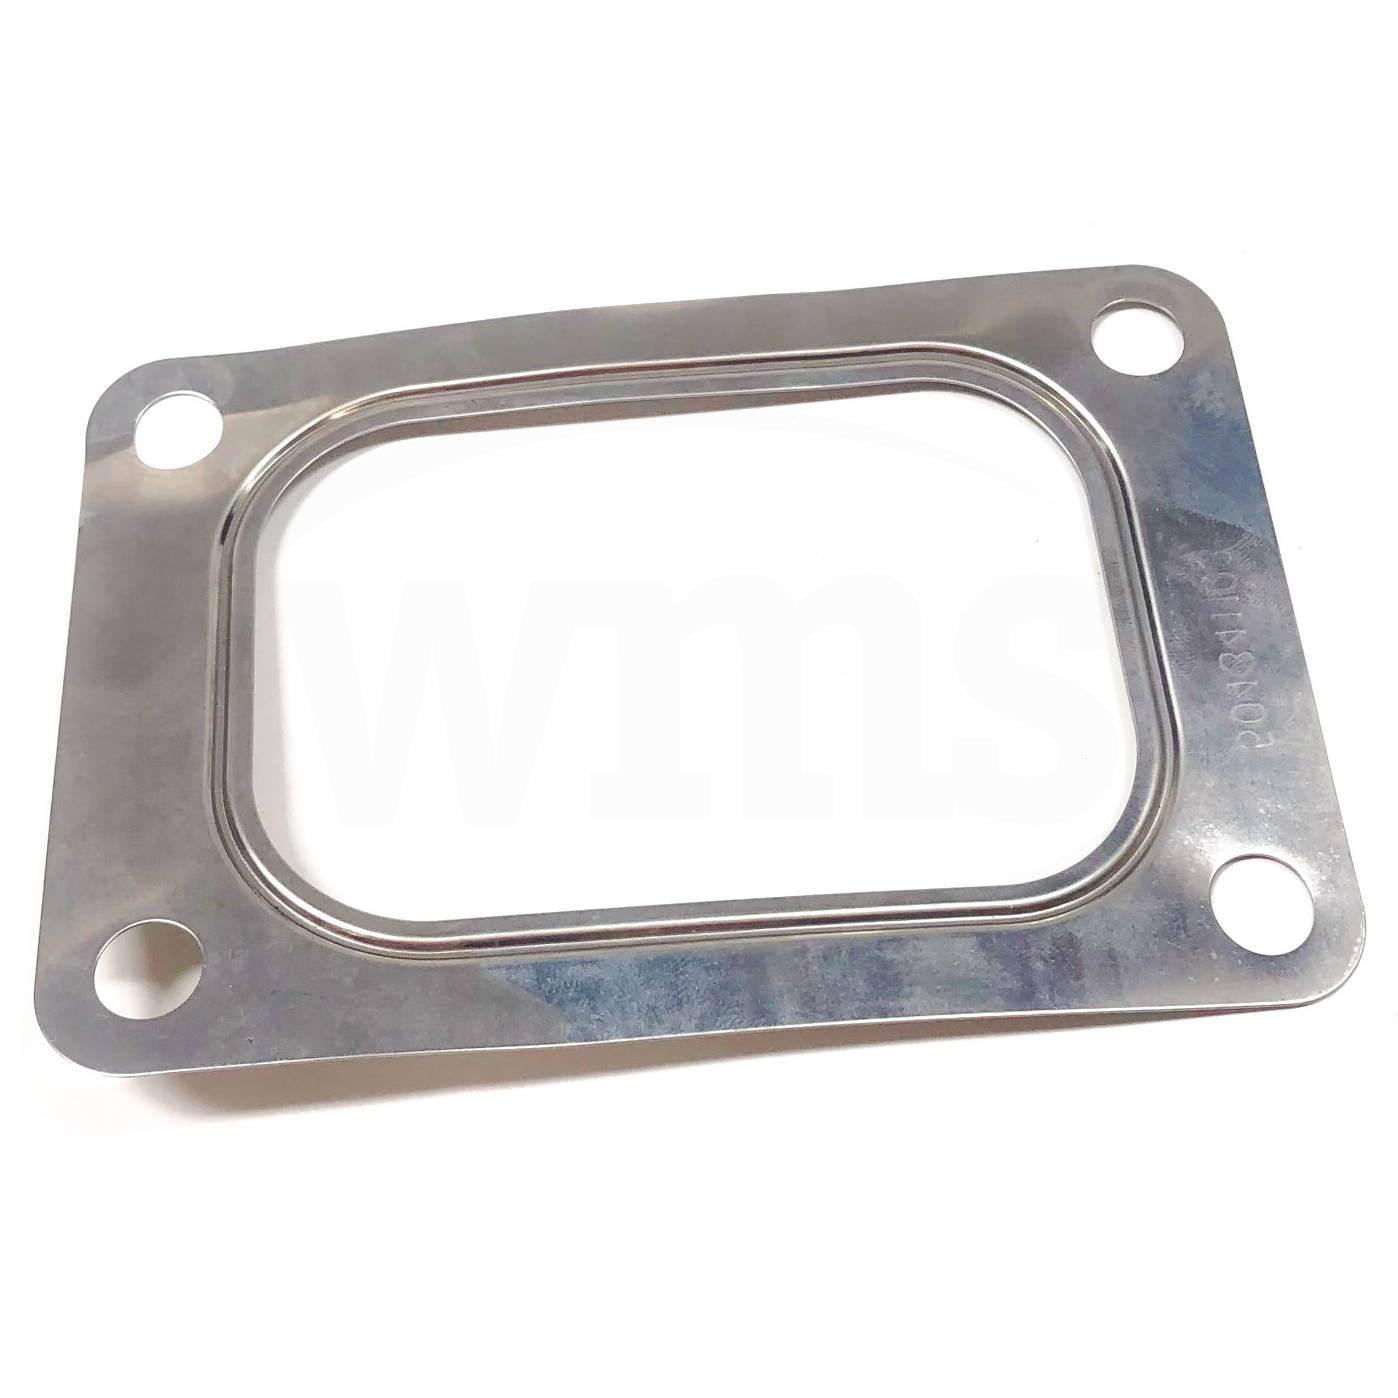 504341103 Case New Holland Industrial (CNH) Manifold Gasket 2